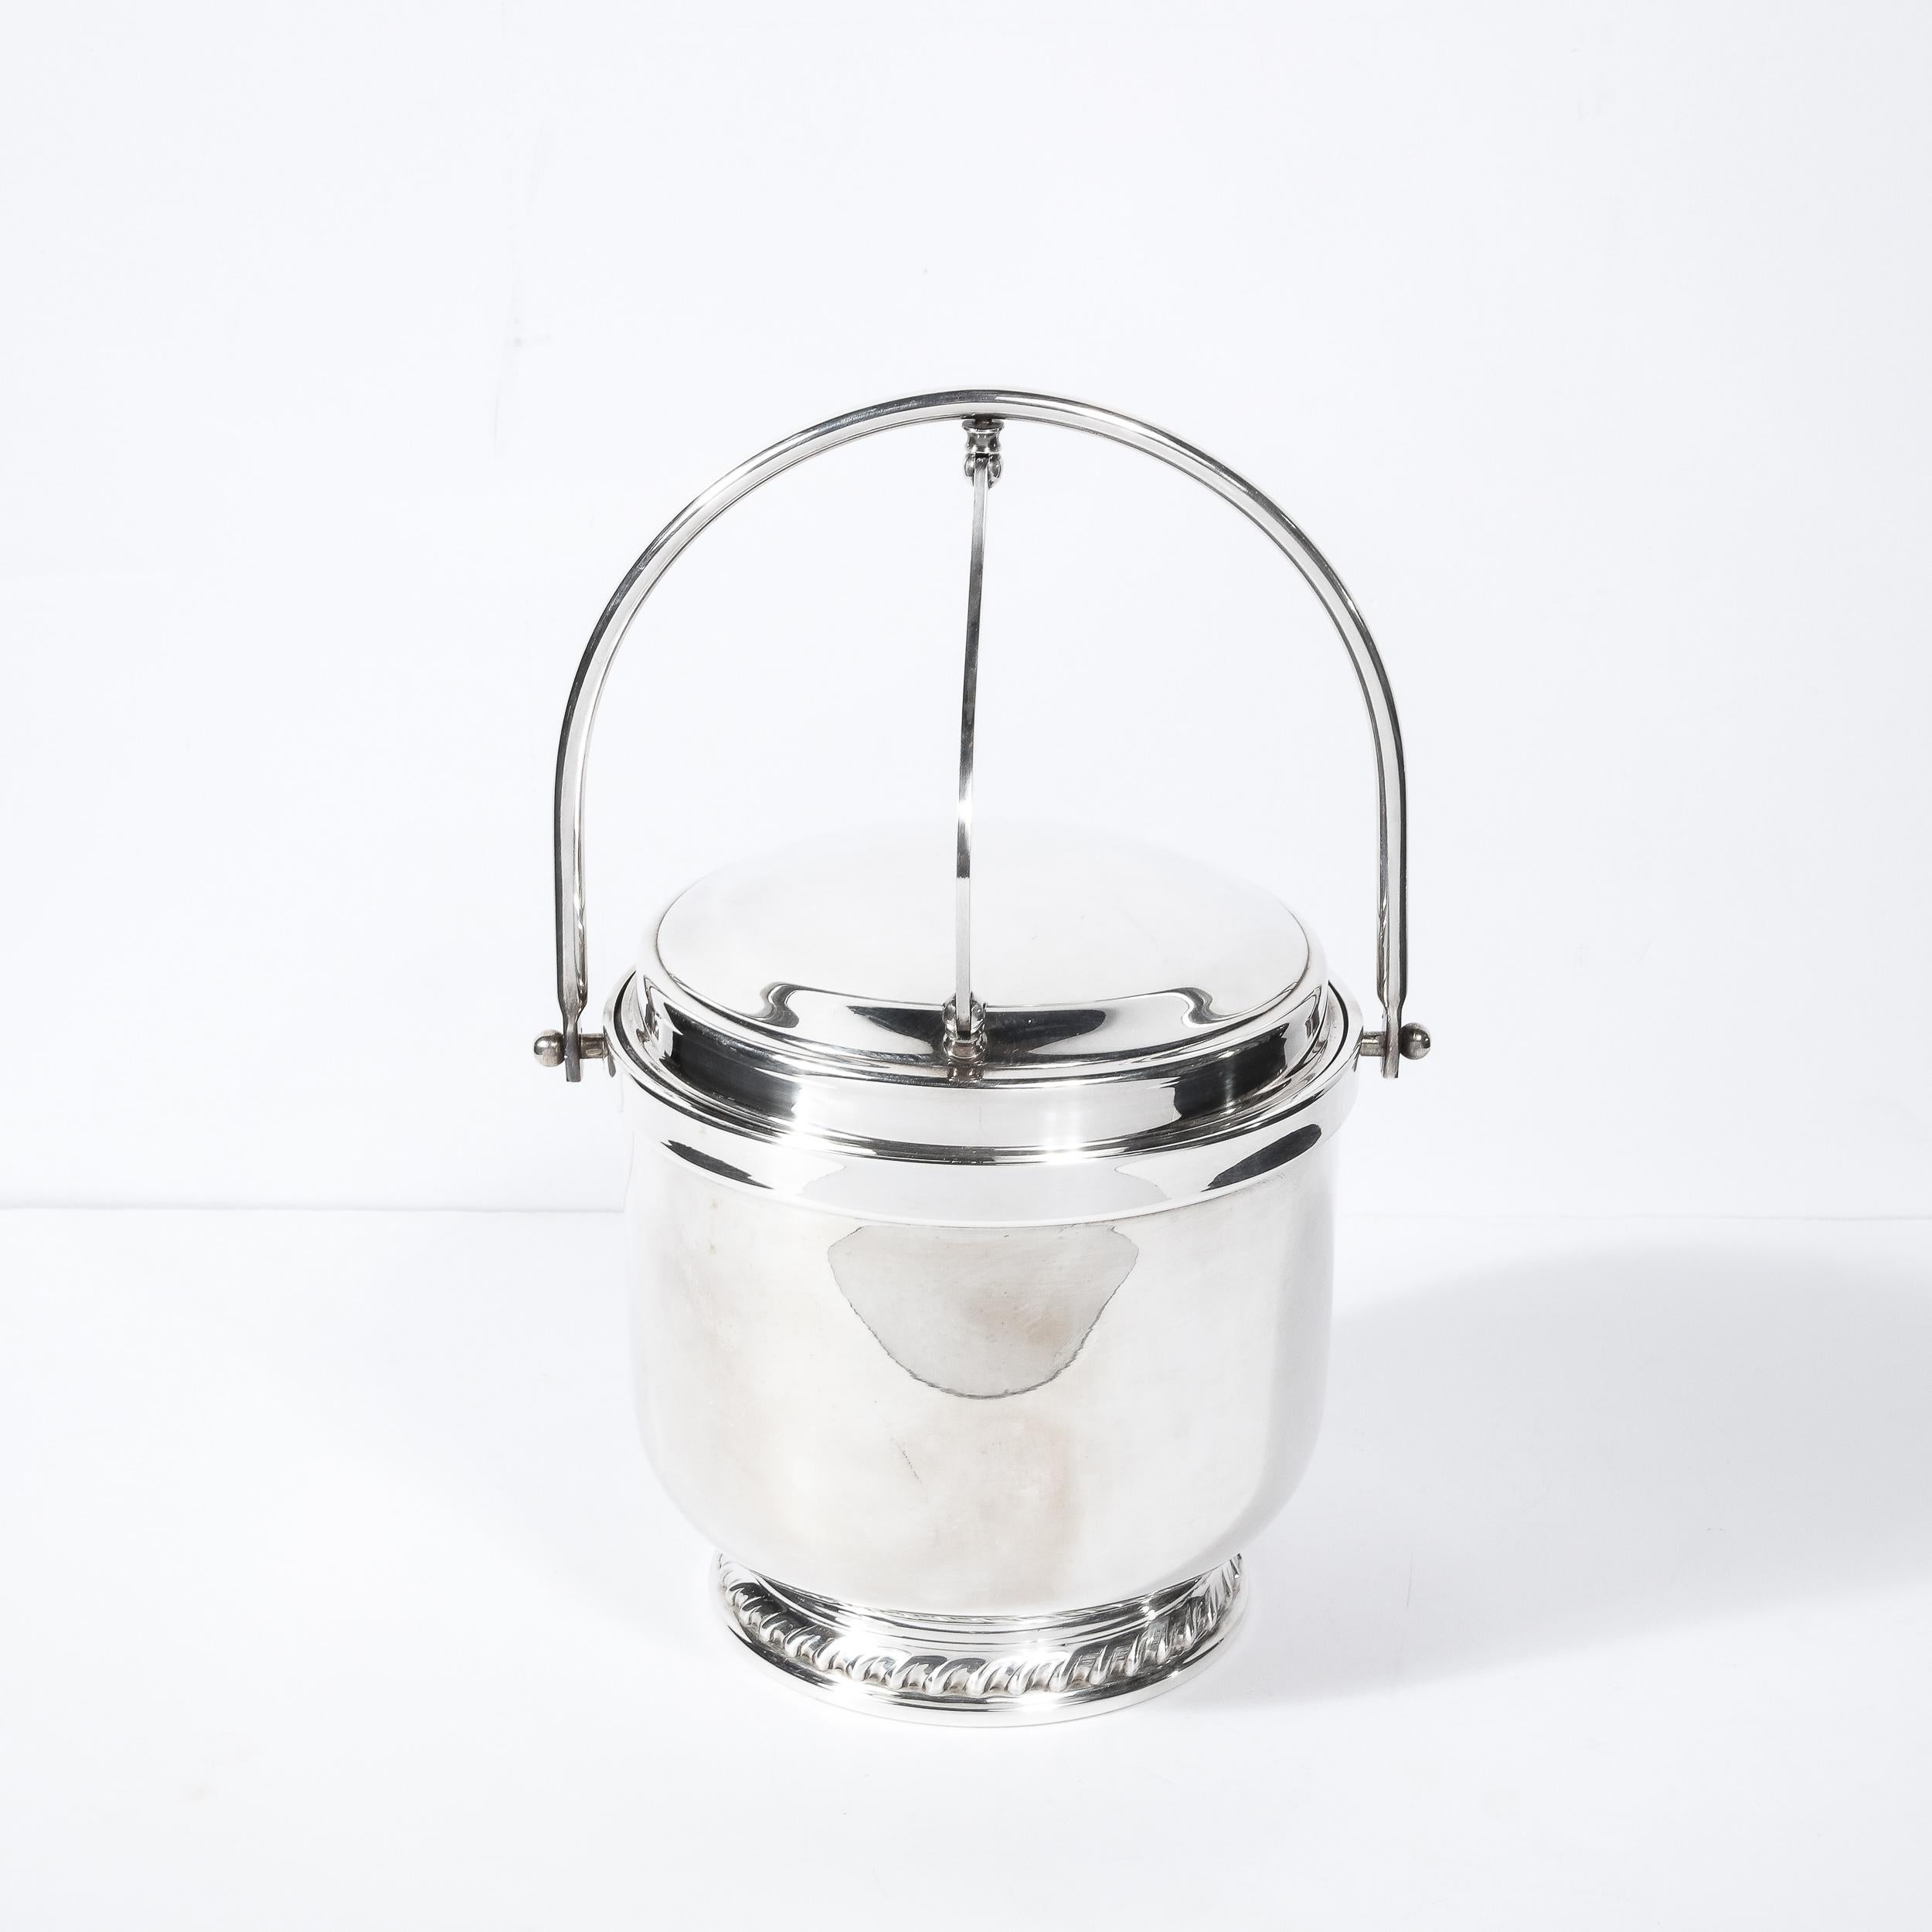 This beautiful Mid-Century Modern silverplate ice bucket was realized in the United States circa 1950. It features a circular base with amorphic stylized tear drop detailing in relief that ascends into a cylindrical body culminating in a stepped